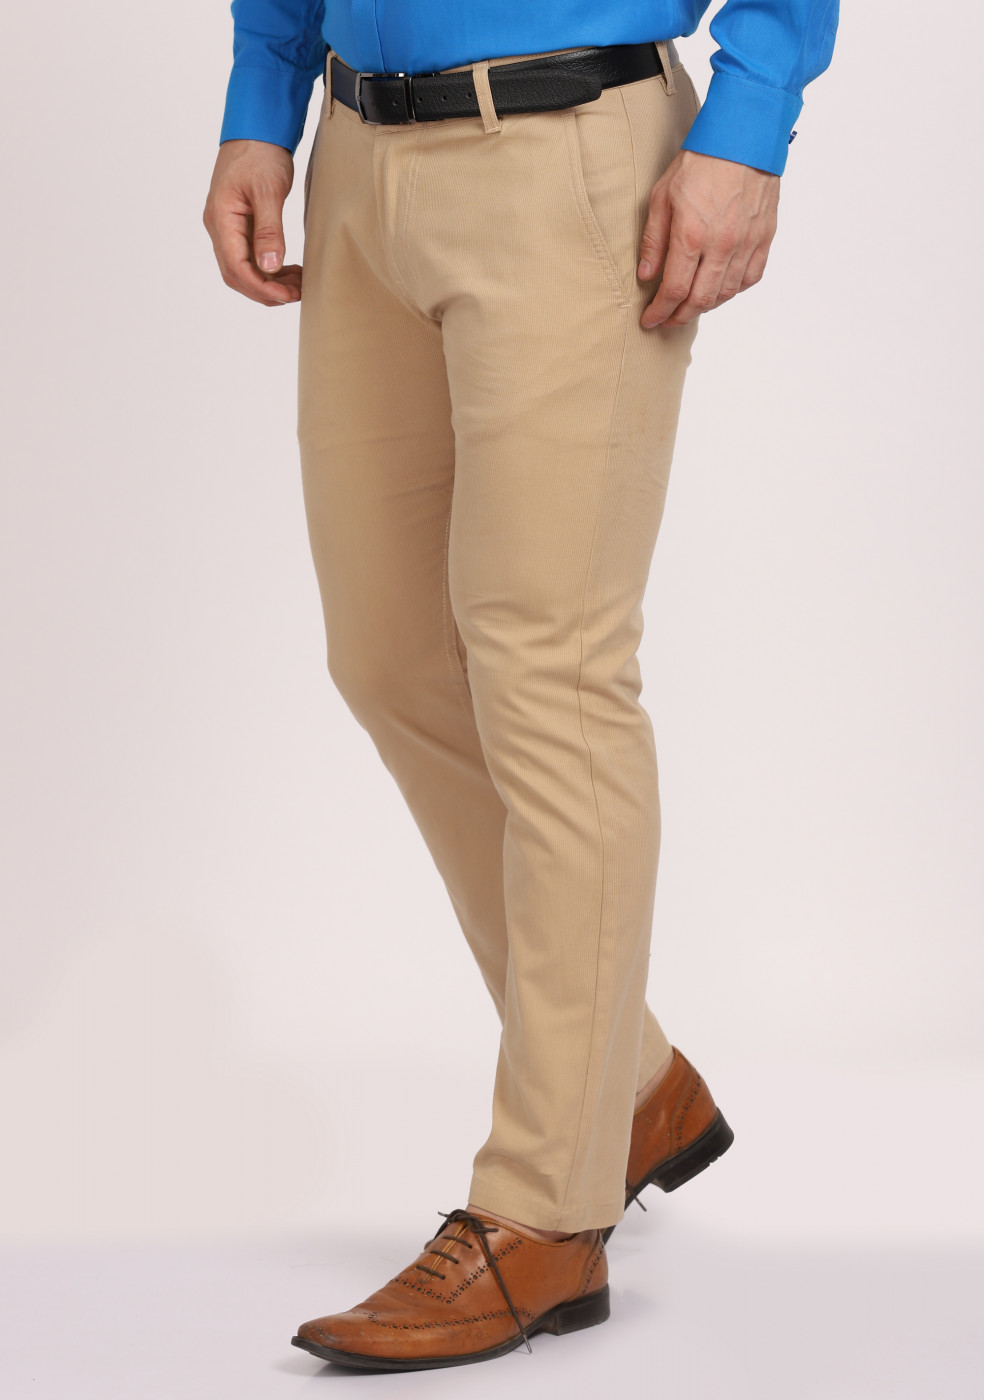 Buy STOP Solid Cotton Stretch Regular Fit Men's Trousers | Shoppers Stop-saigonsouth.com.vn